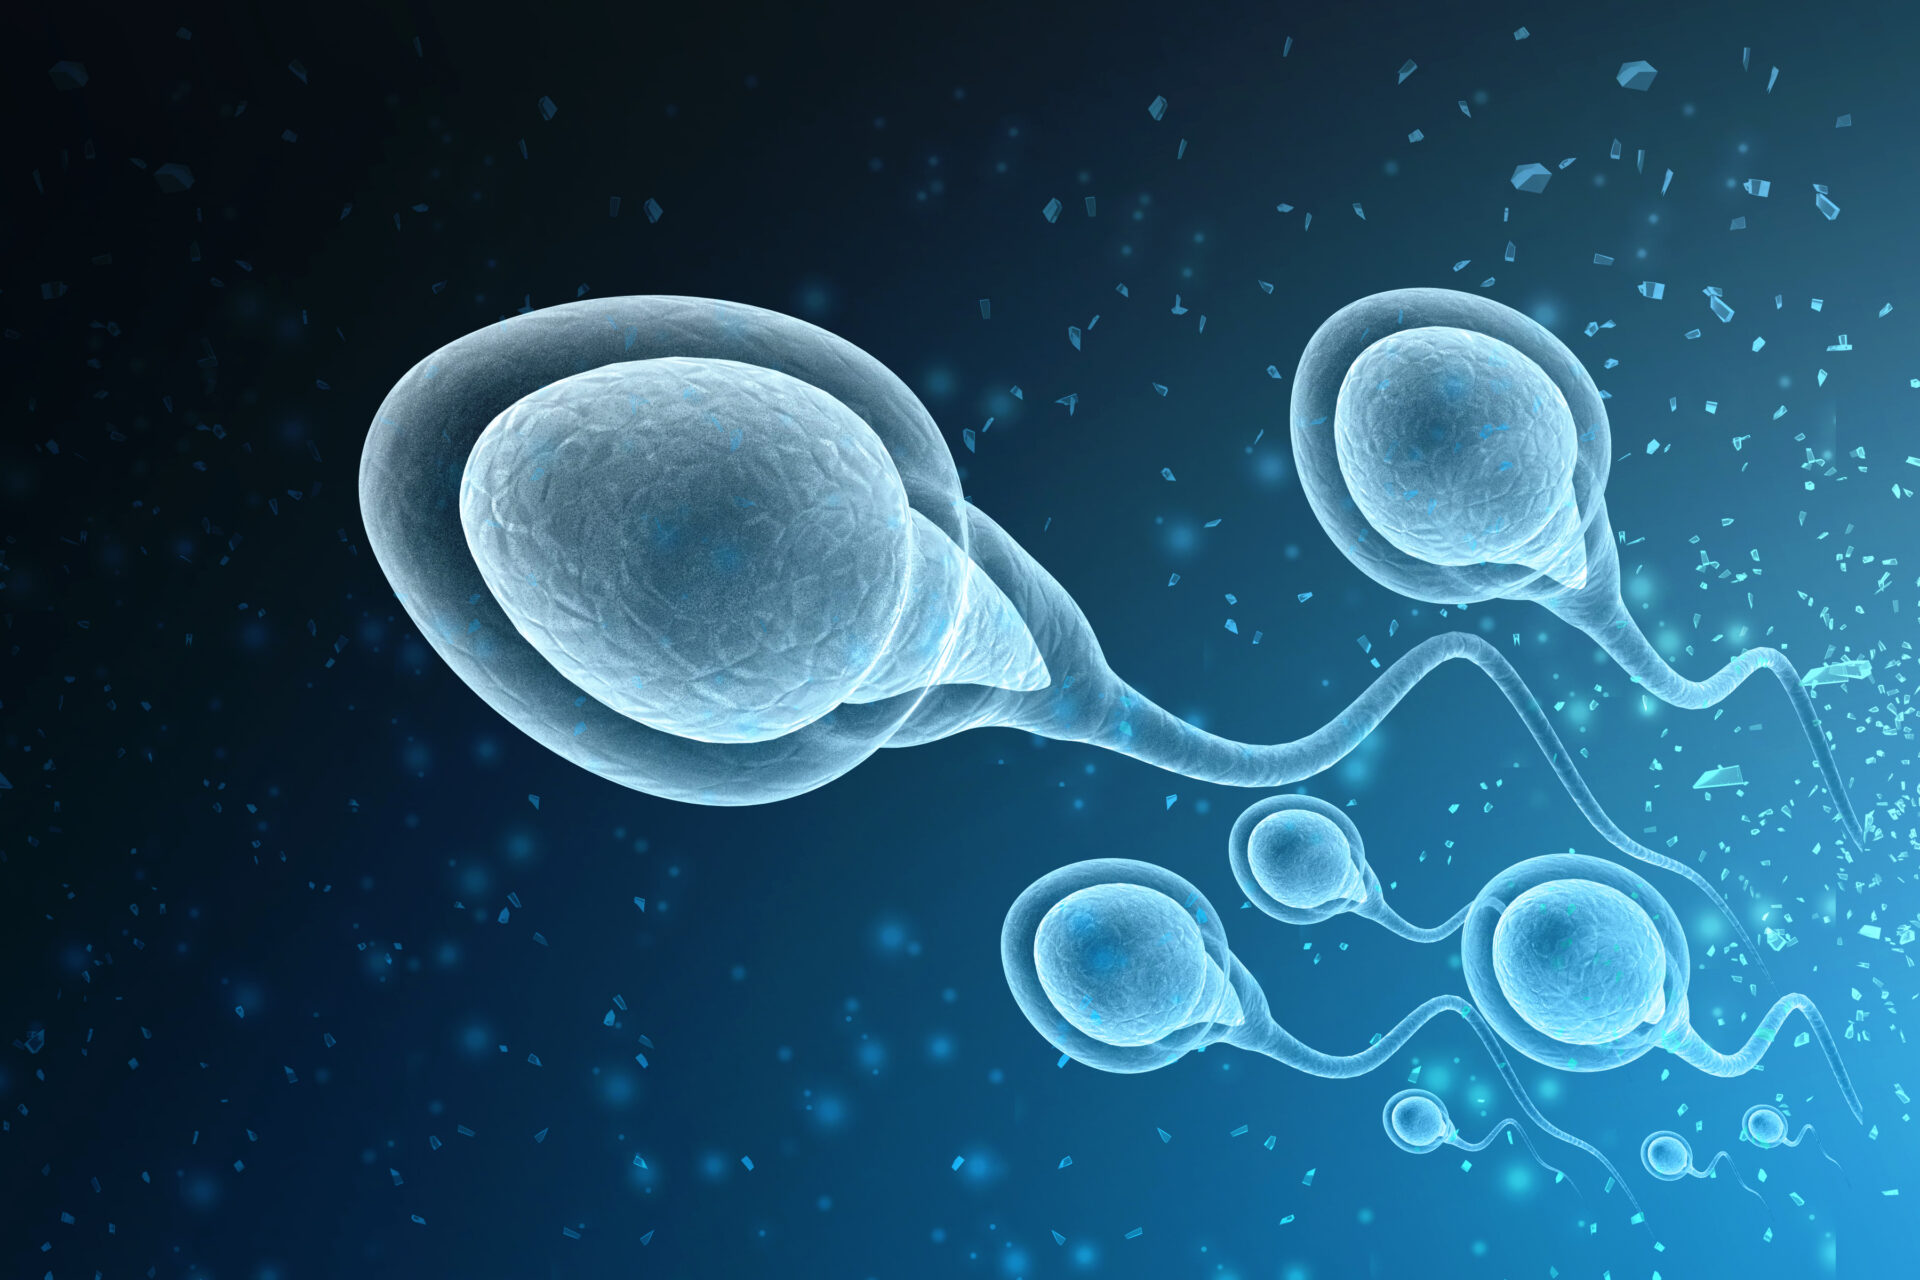 A 3D rendering of human sperm. Illustration by White Markers via Shutterstock